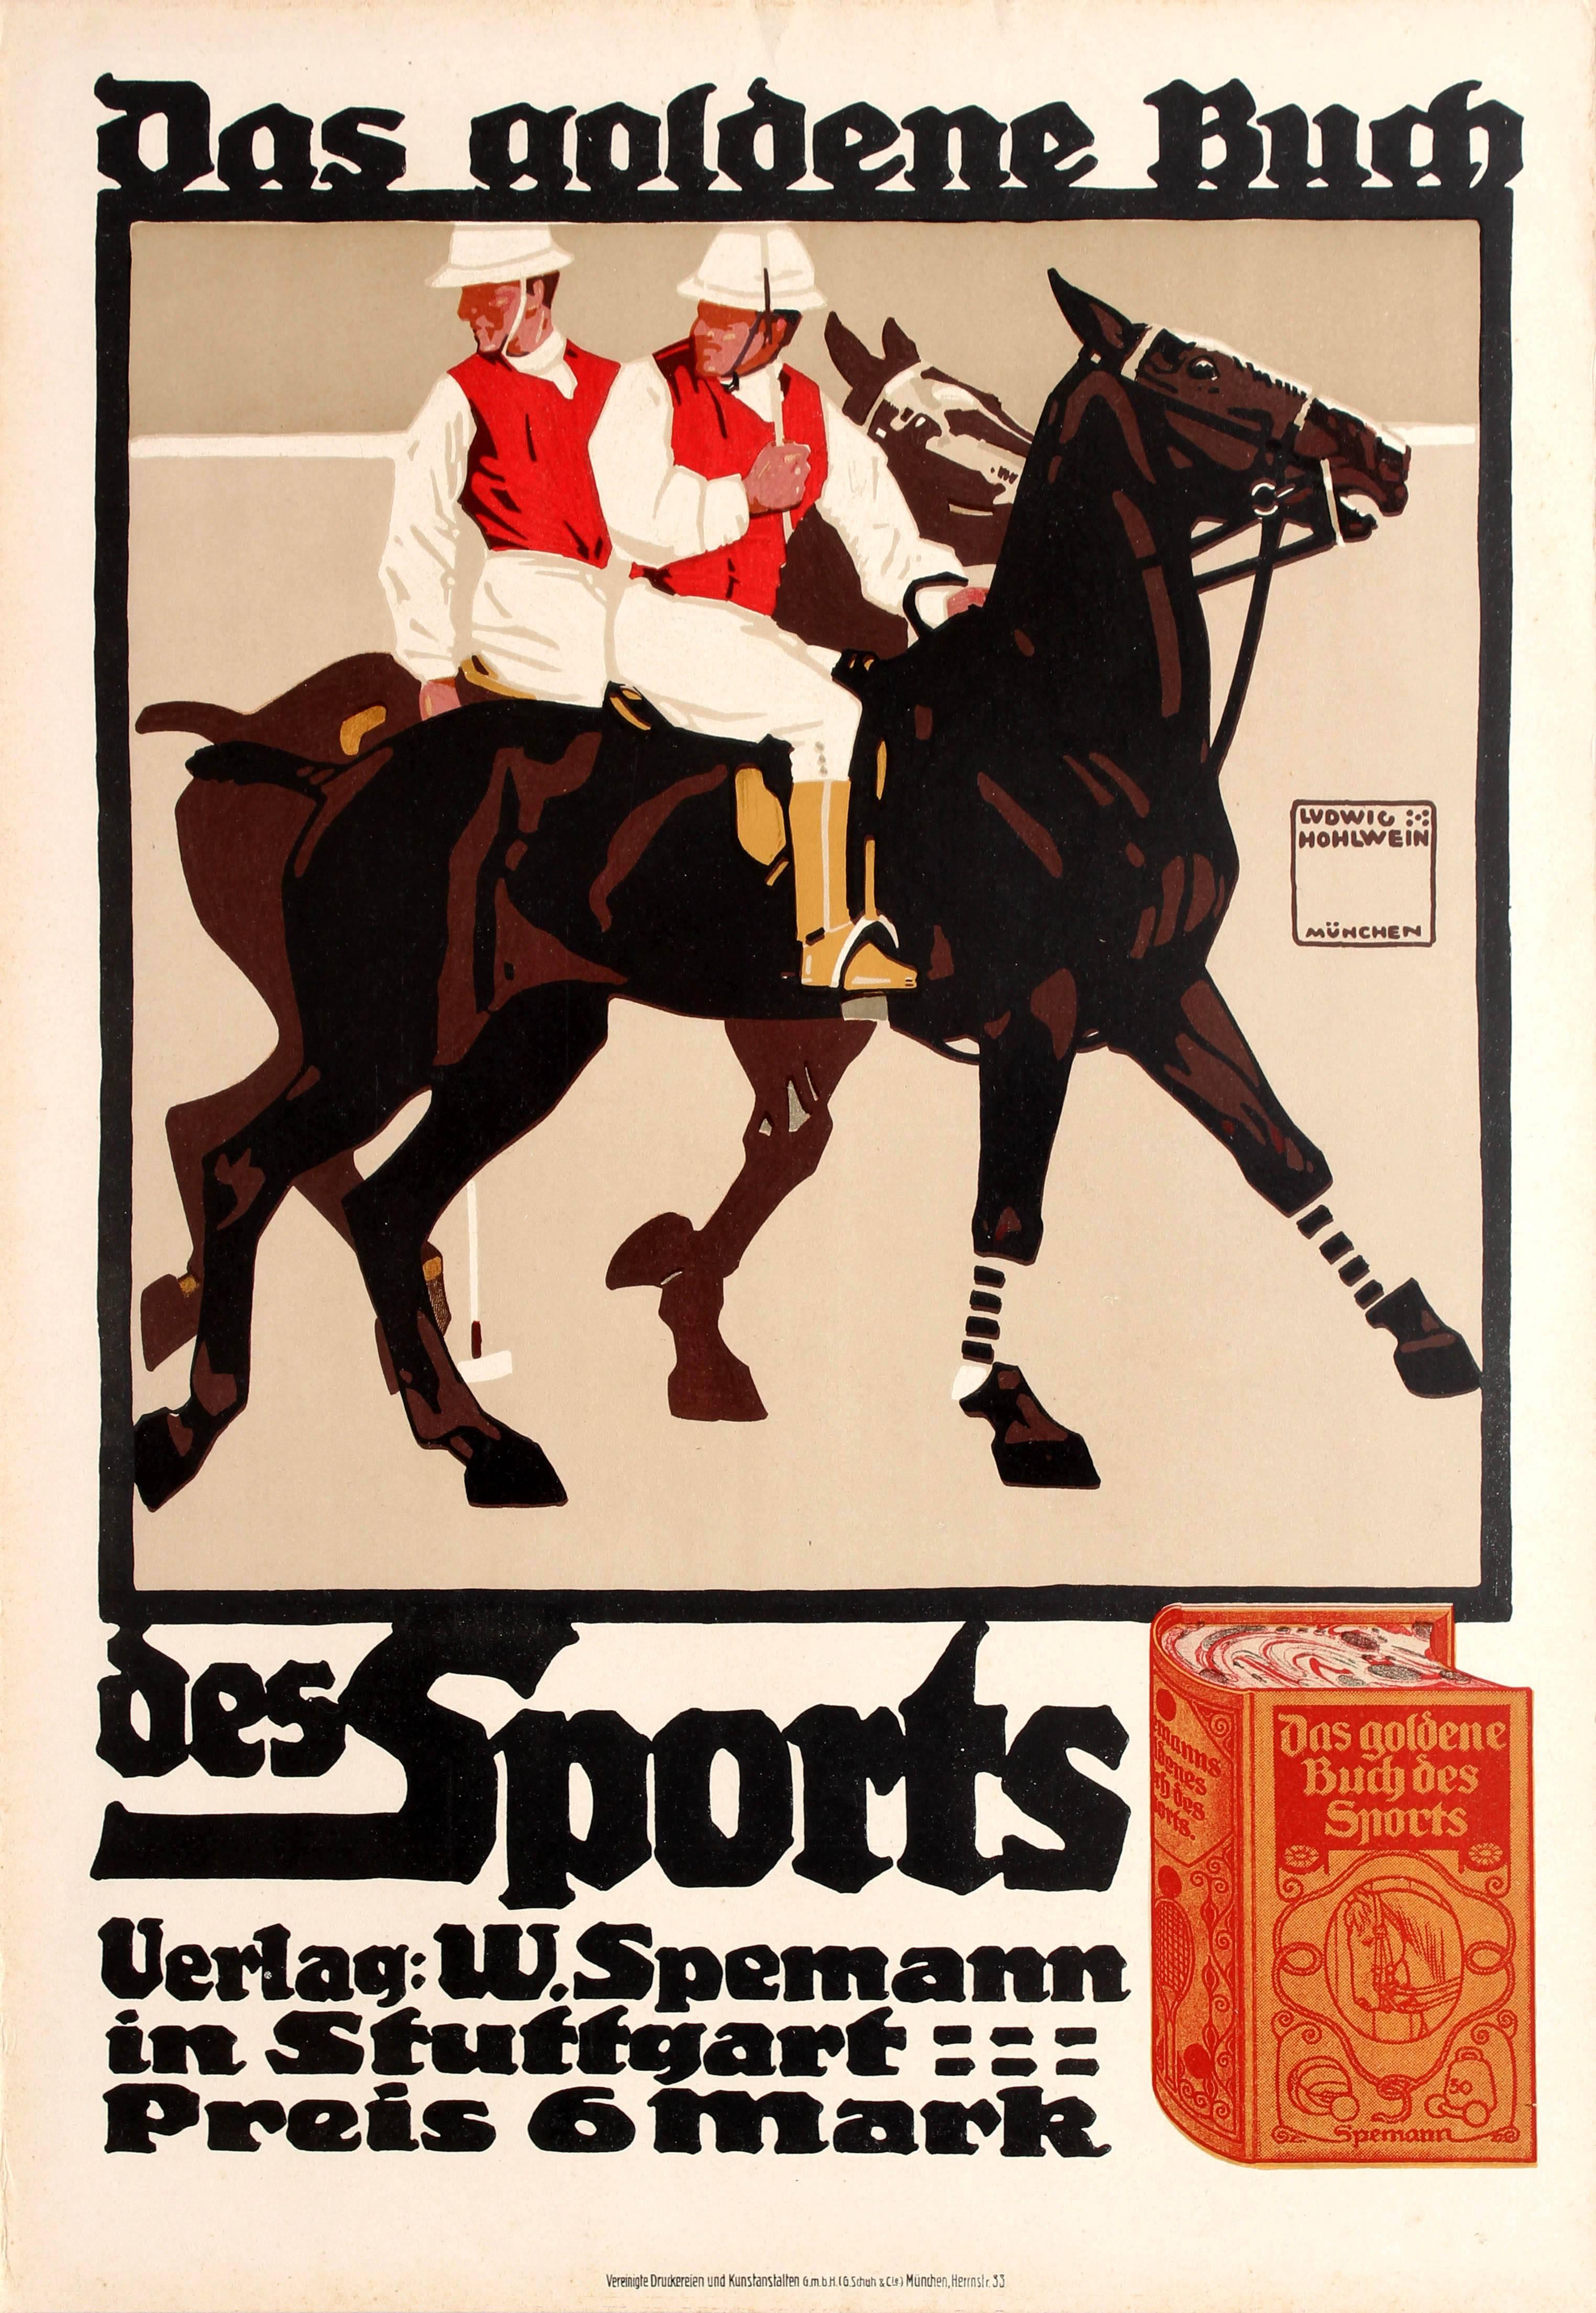 Ludwig Hohlwein Print - Original Antique Poster By Hohlwein For The Golden Book Of Sports Featuring Polo